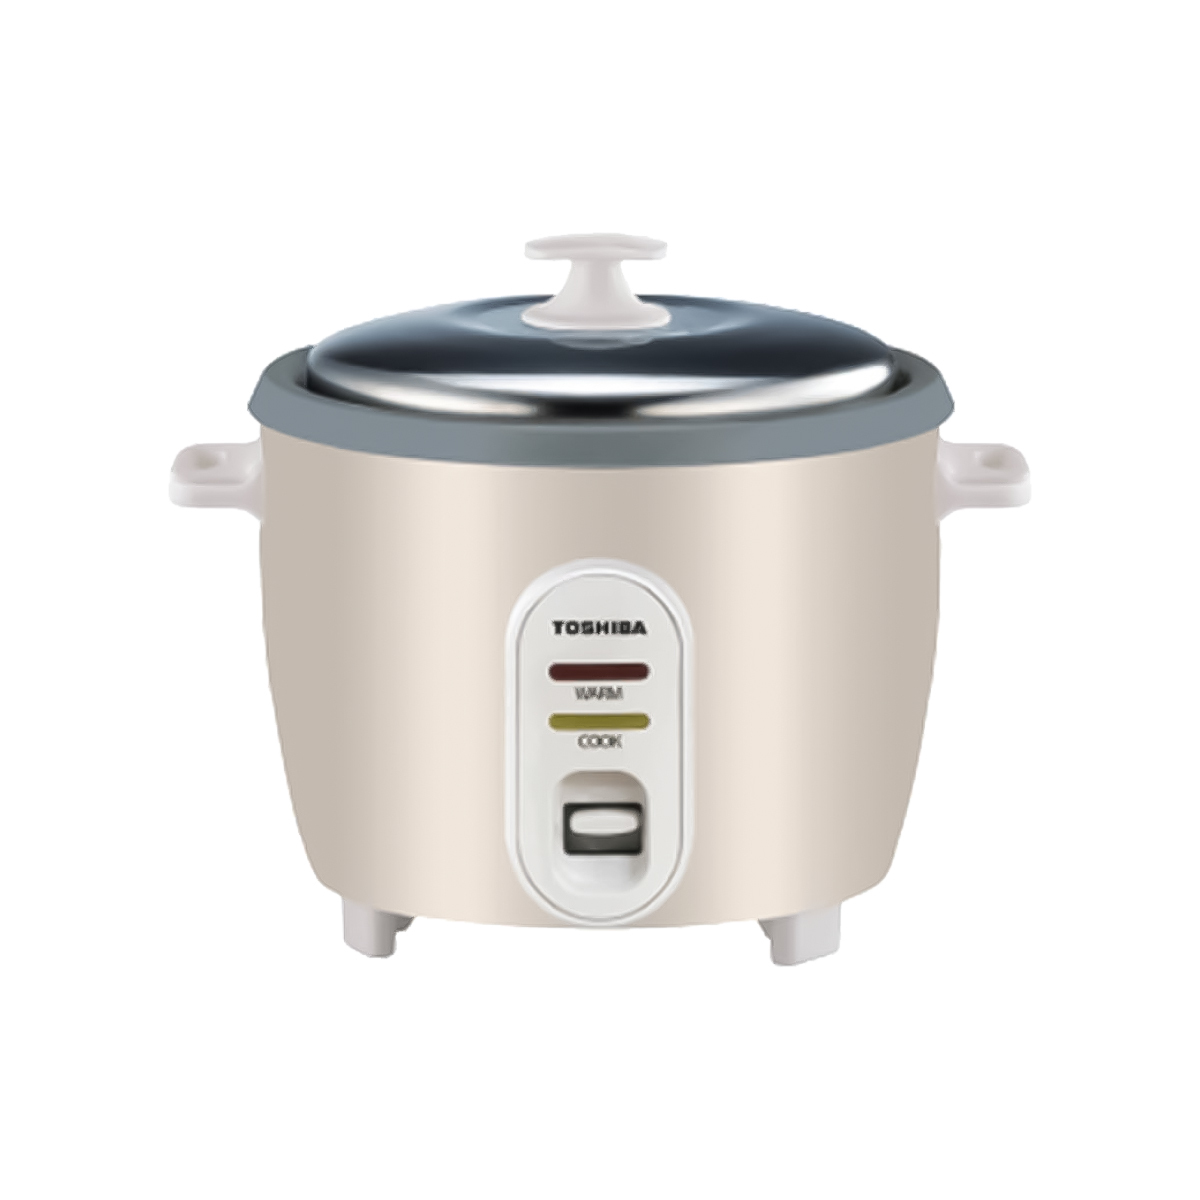 Toshiba Convetional Rice Cooker 1.8 Liter RC-T18CEMY